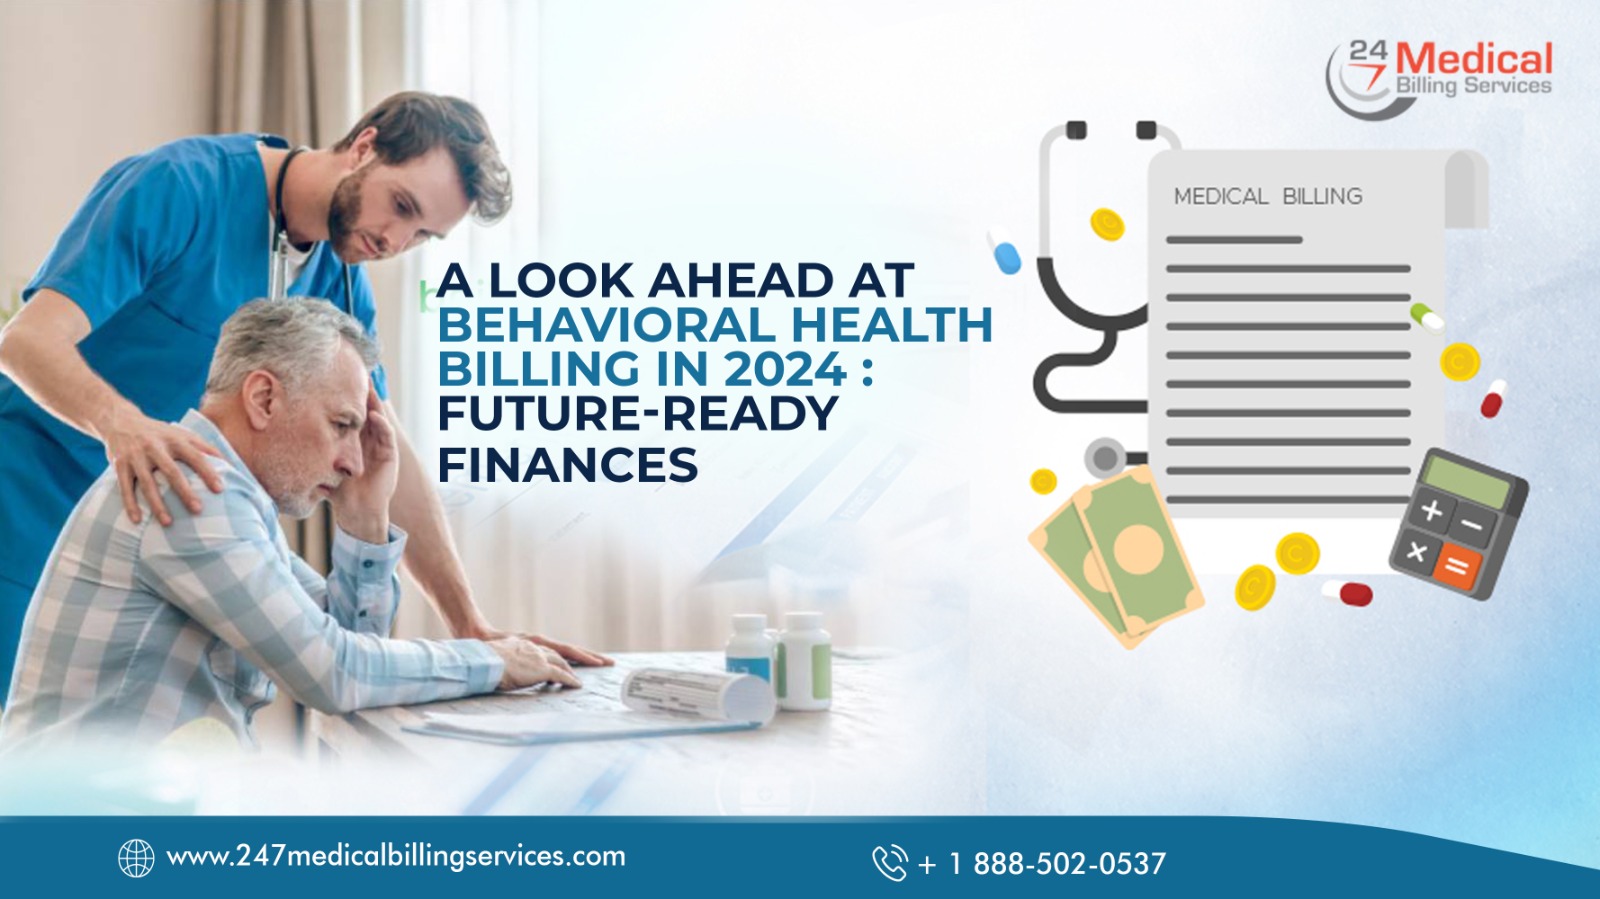  A Look Ahead at Behavioral Health Billing in 2024: Future-Ready Finances